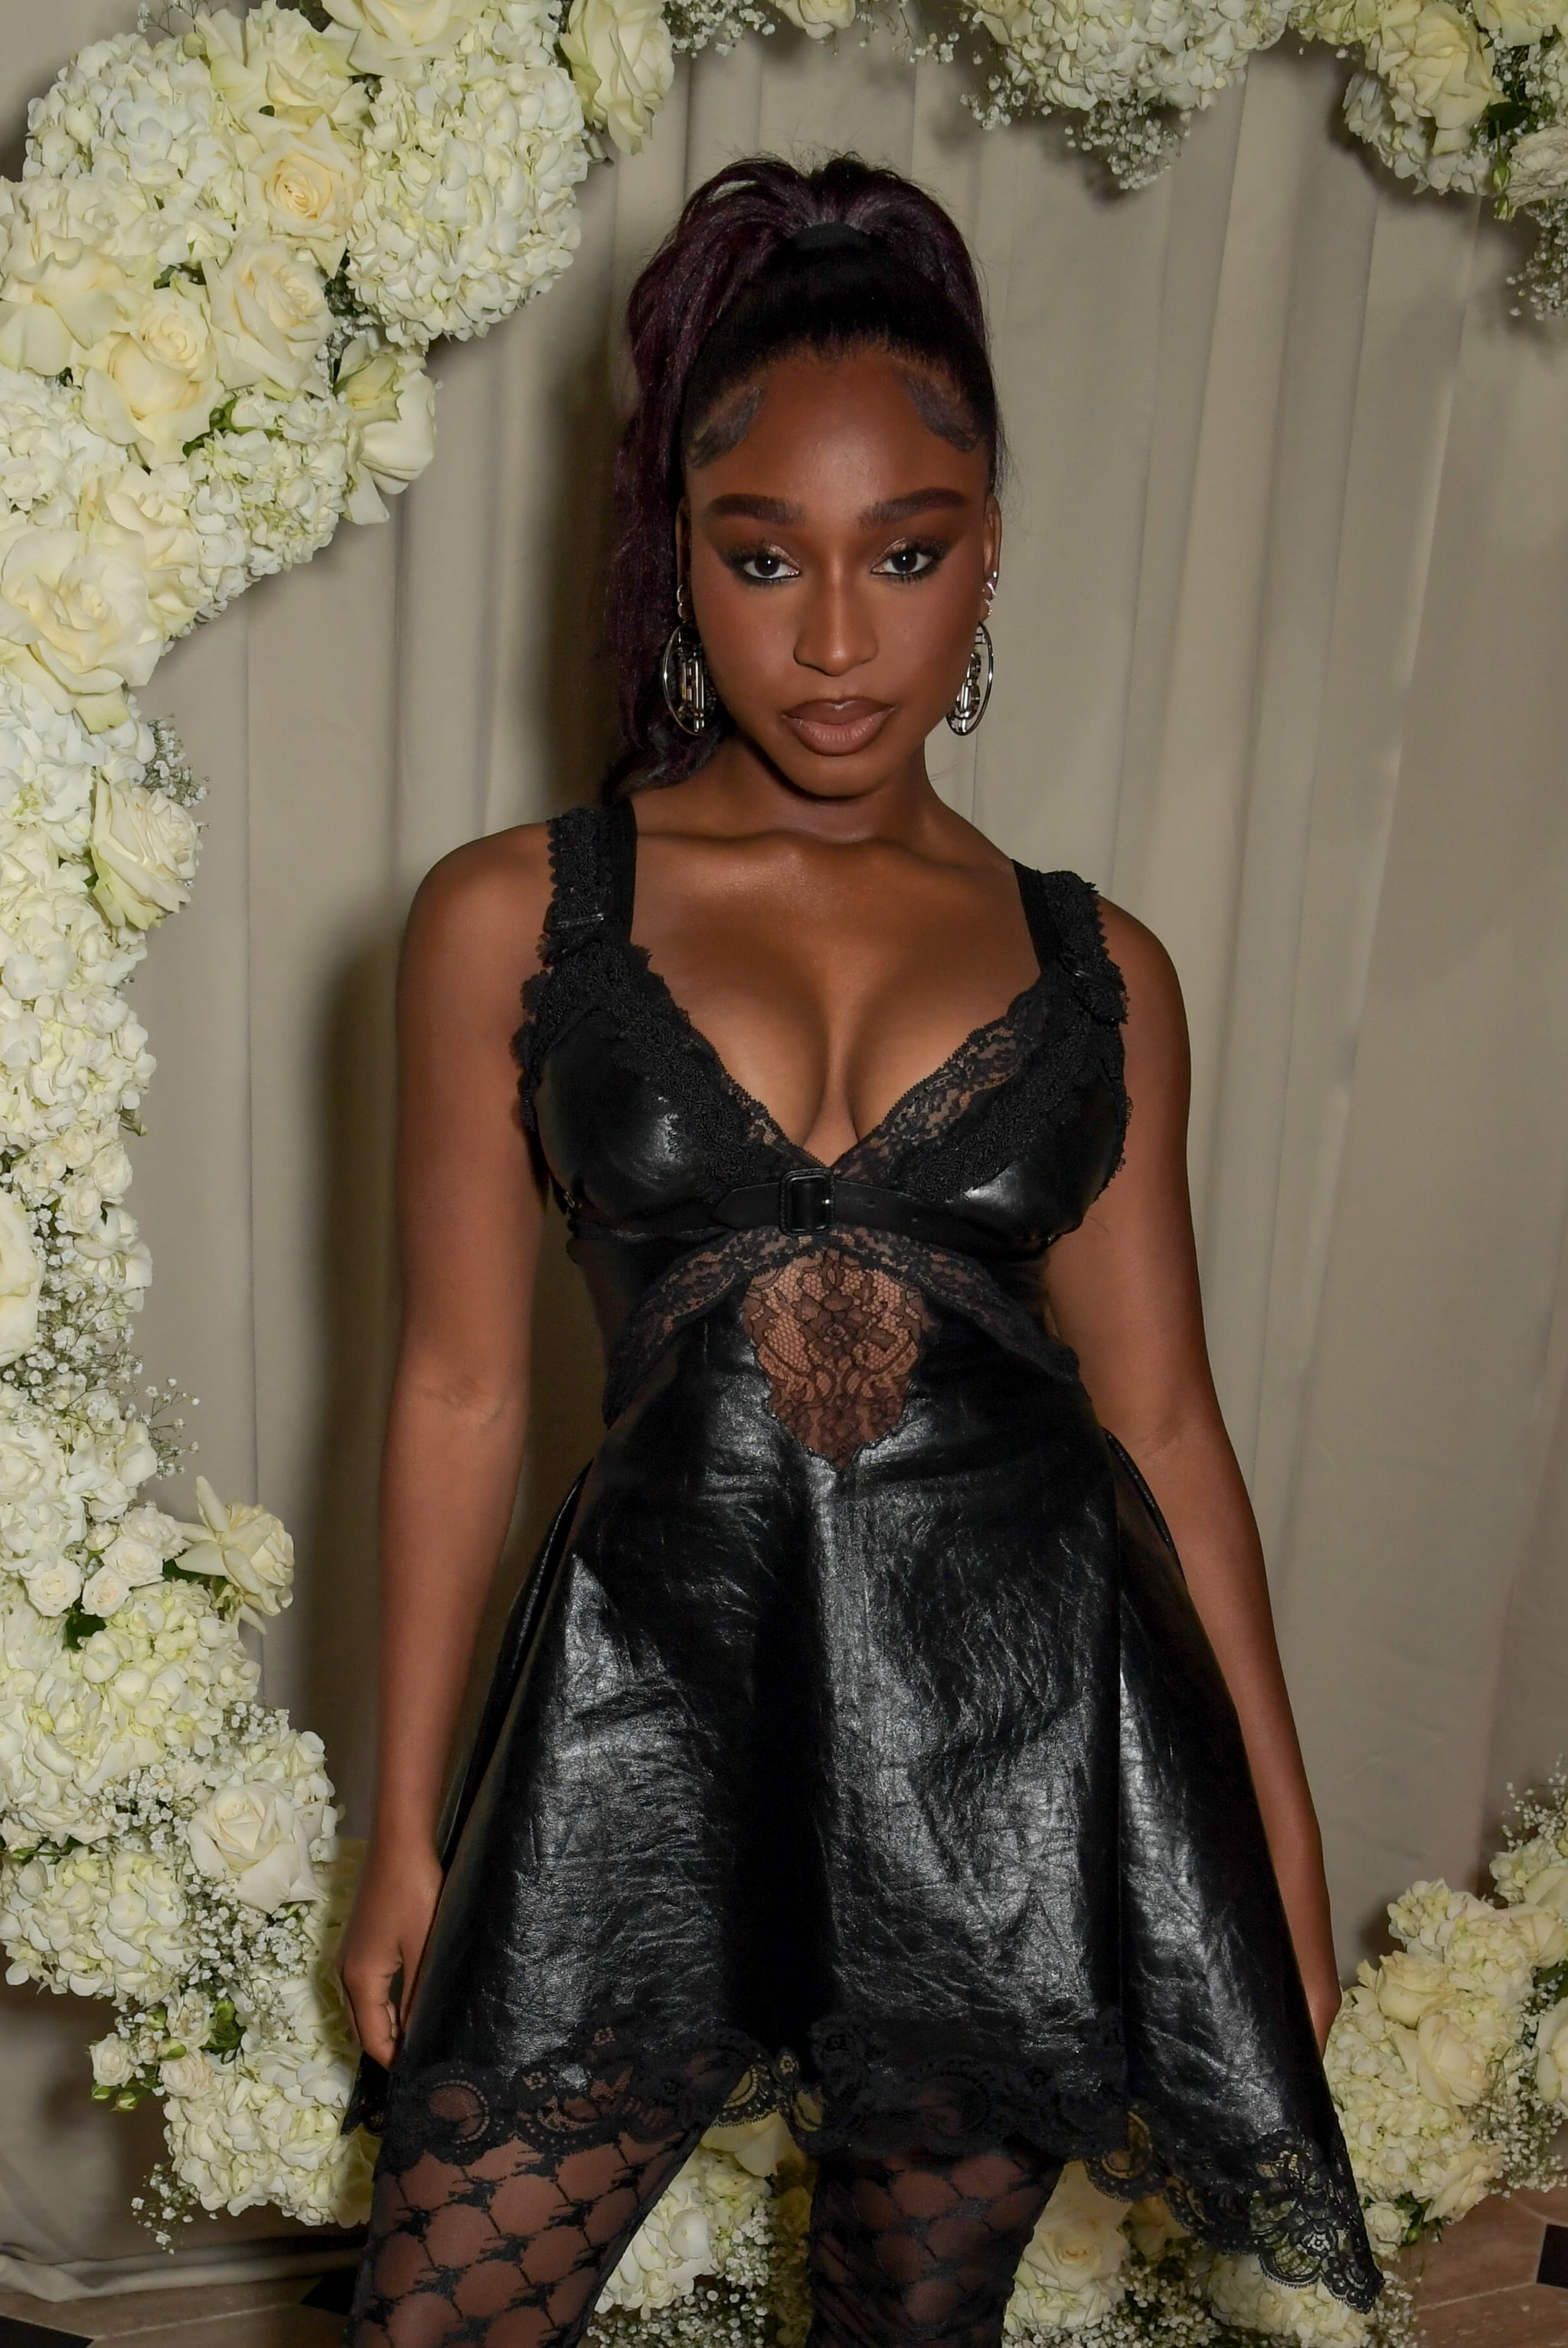 LONDON, ENGLAND - SEPTEMBER 26: Normani attends the Burberry Spring/Summer 2022 aftershow party at The Twenty Two on September 26, 2022 in London, England. (Photo by David M. Benett/Dave Benett/Getty Images for Burberry)